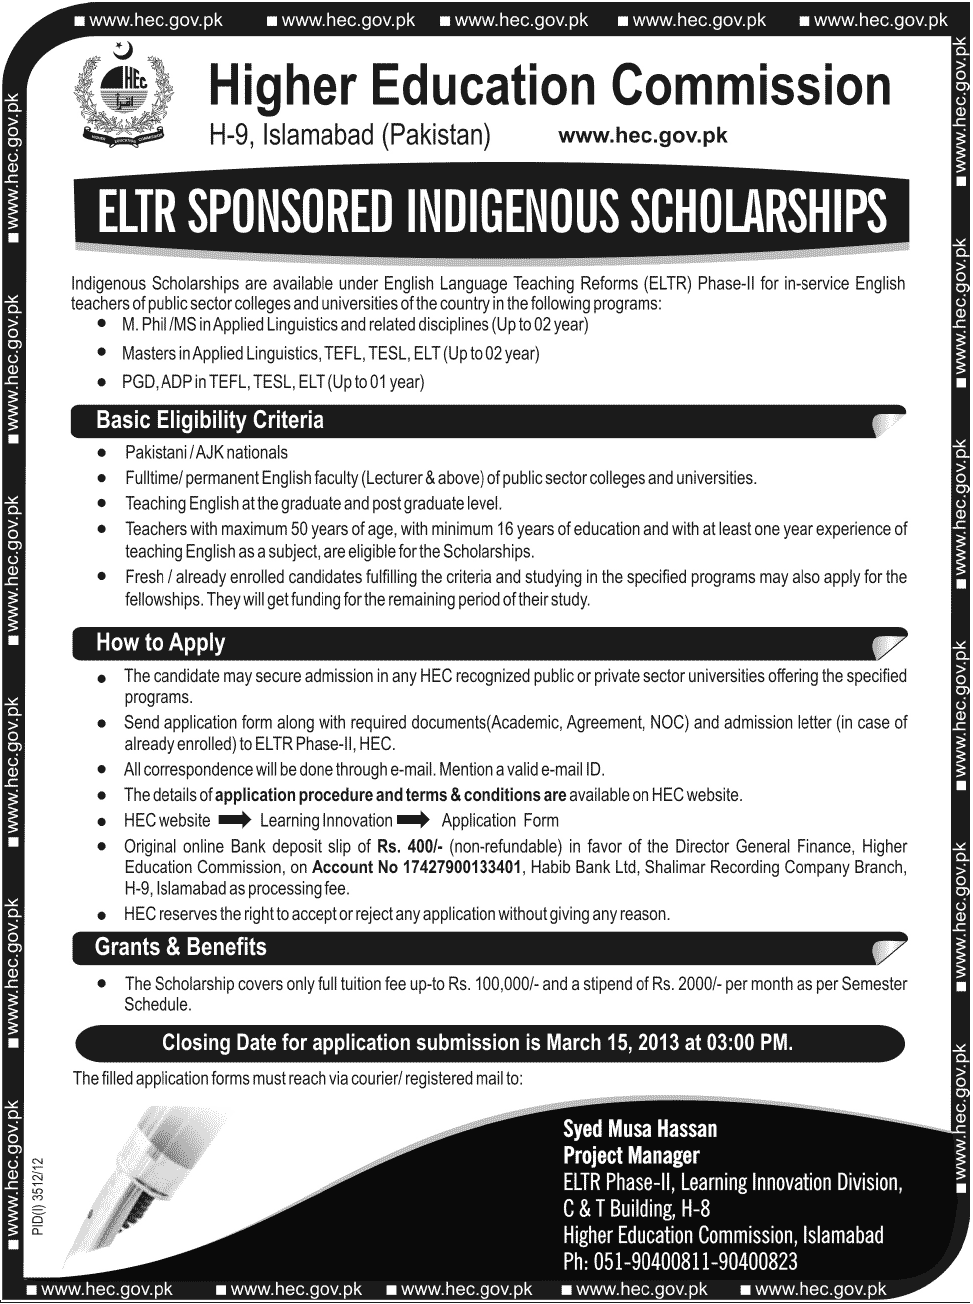 English Language Teaching Reforms (ELTR) Phase-II Scholarships by HEC